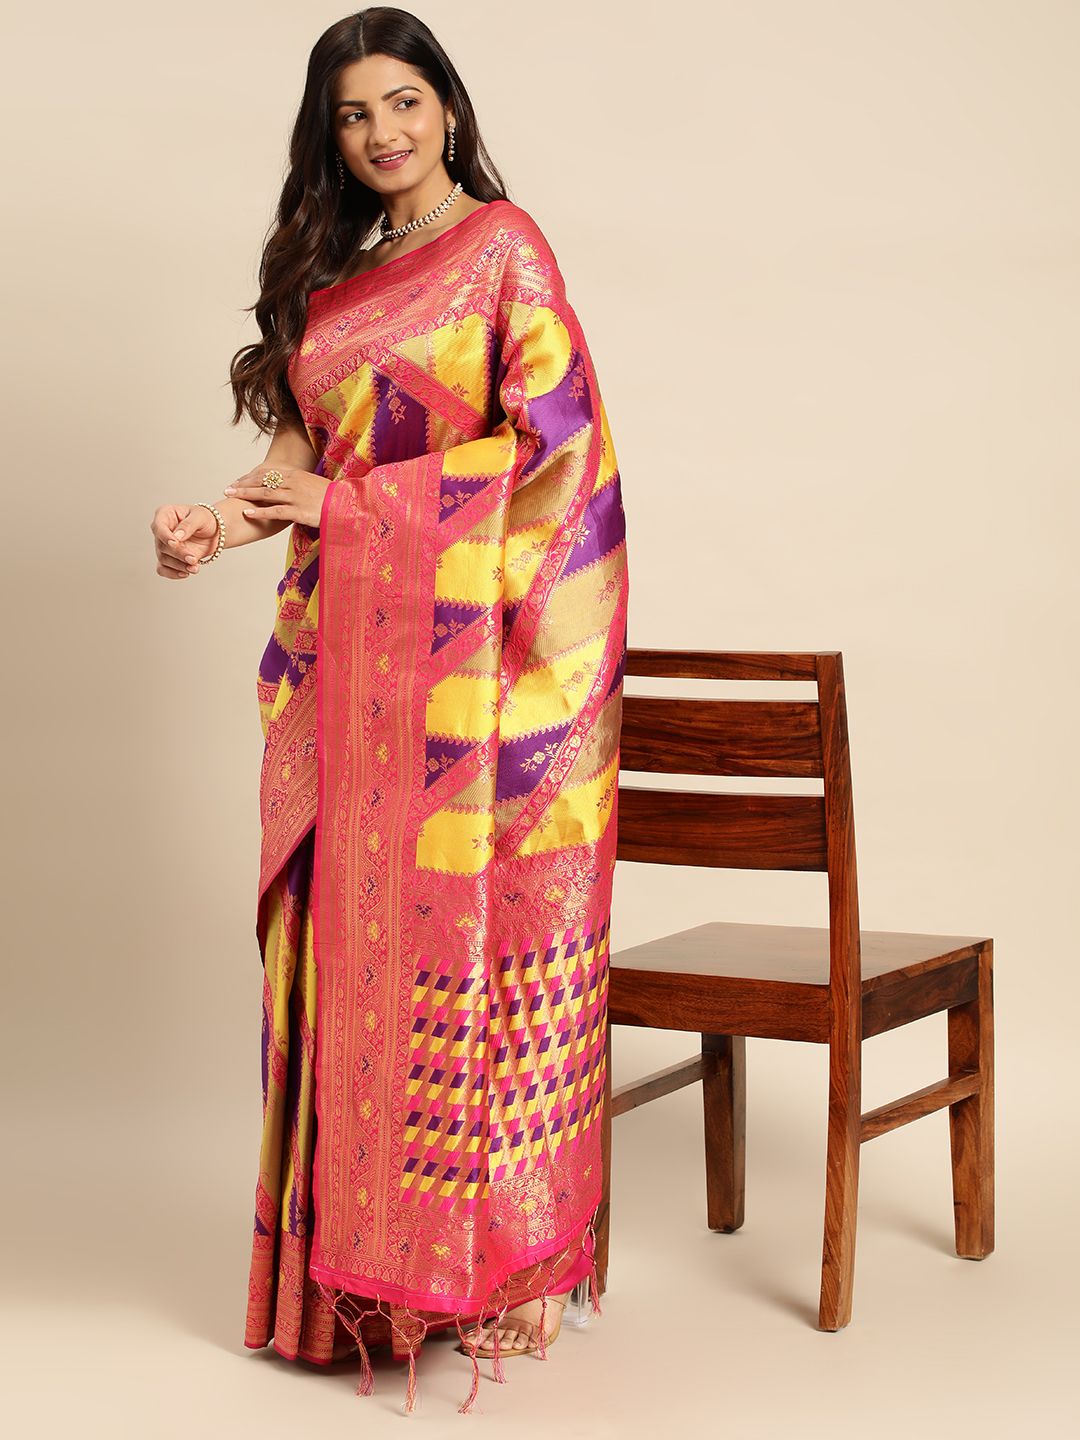 Pink Color Gorgeous Zari Border Silk Saree Perfect Blend of Tradition and Glamour